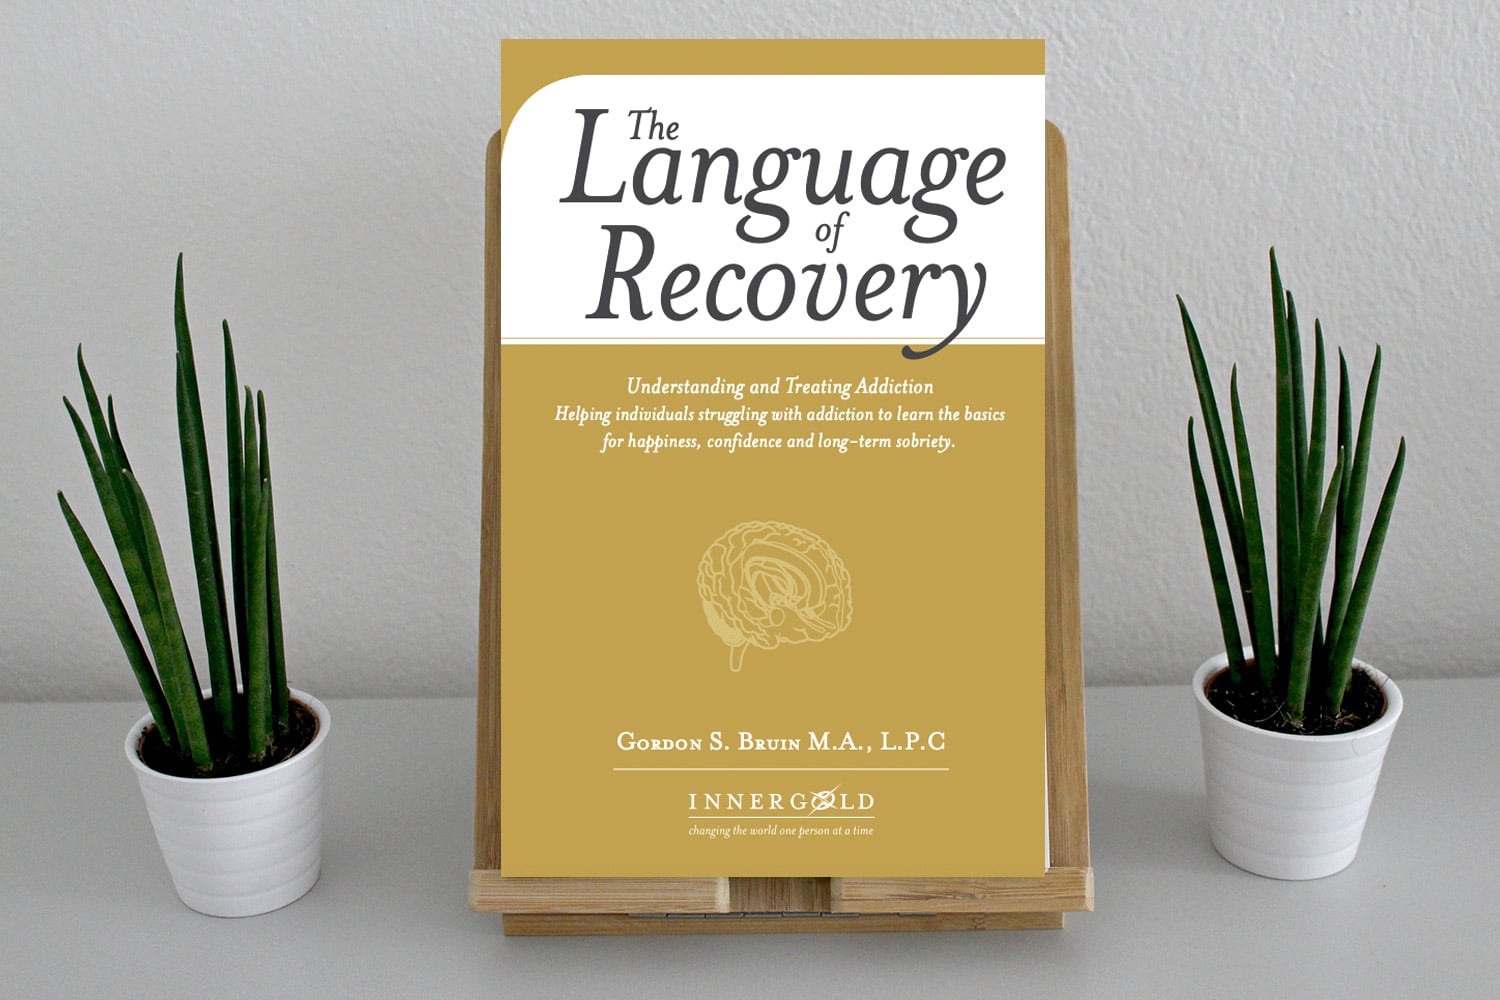 the language of recovery book by gordon s. bruin